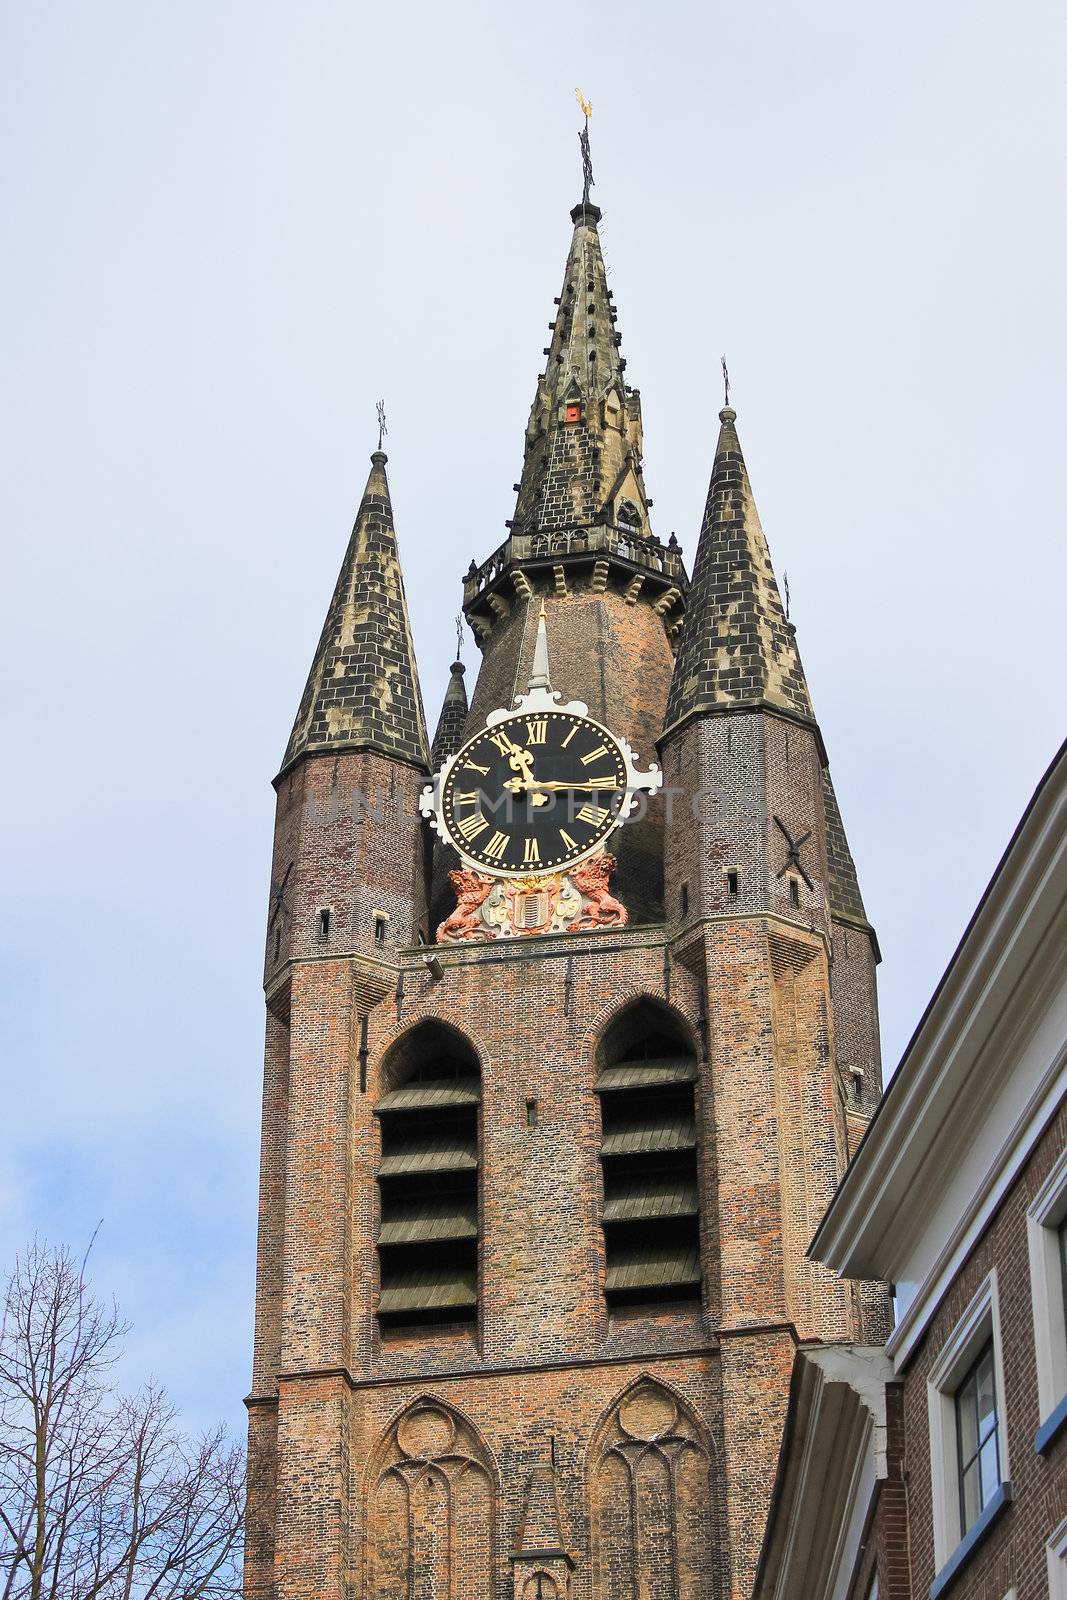 The old church tower in Delft. Netherlands by NickNick